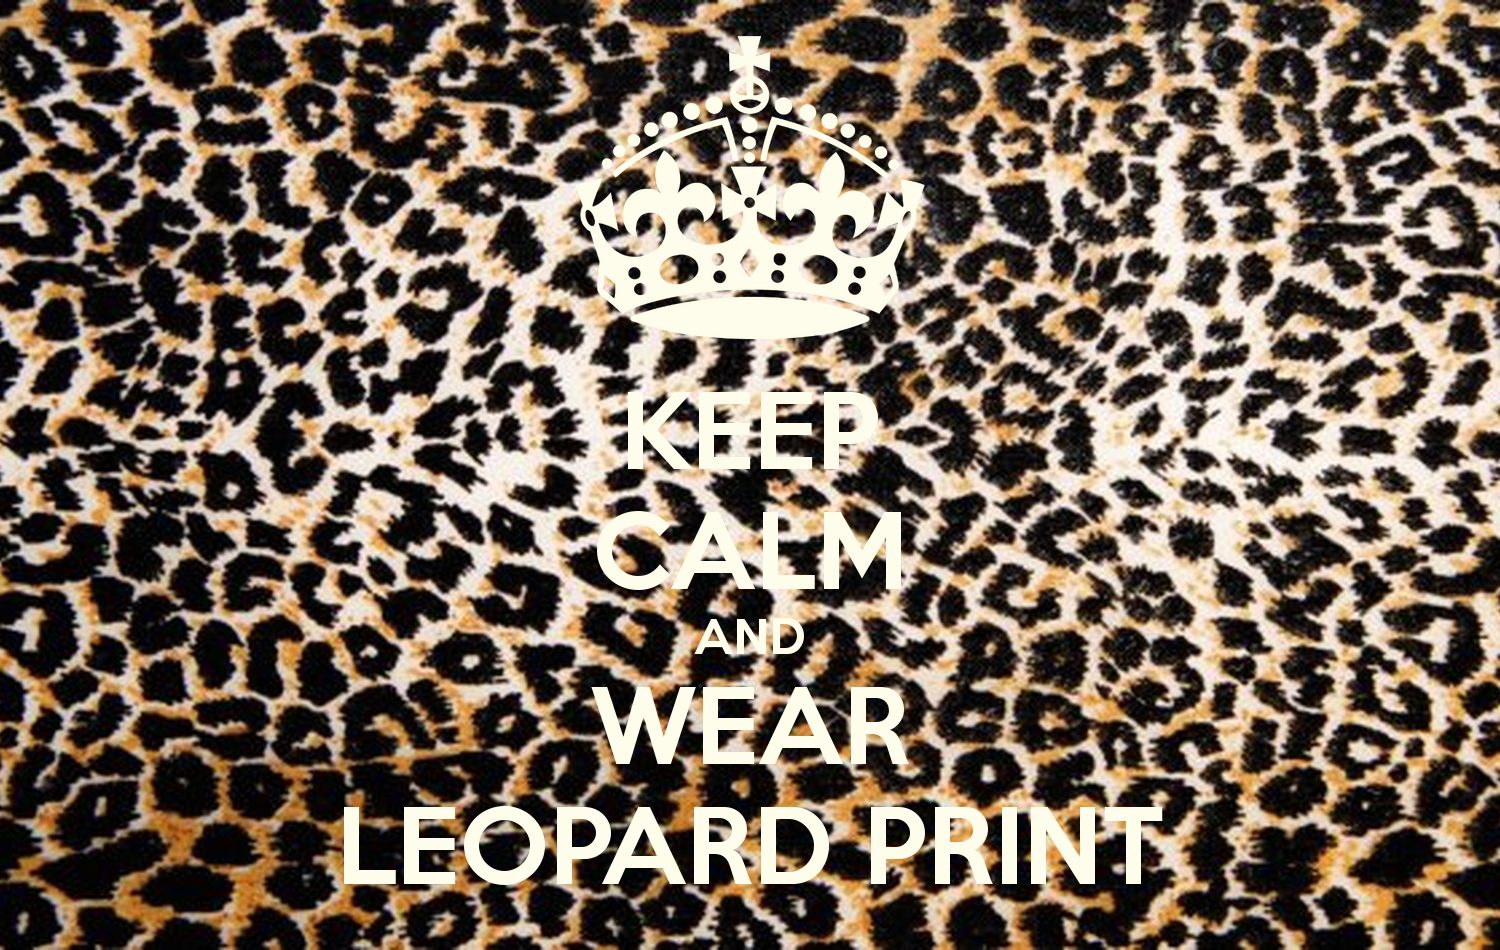 Keep Calm And Wear Leopard Print Carry On Image